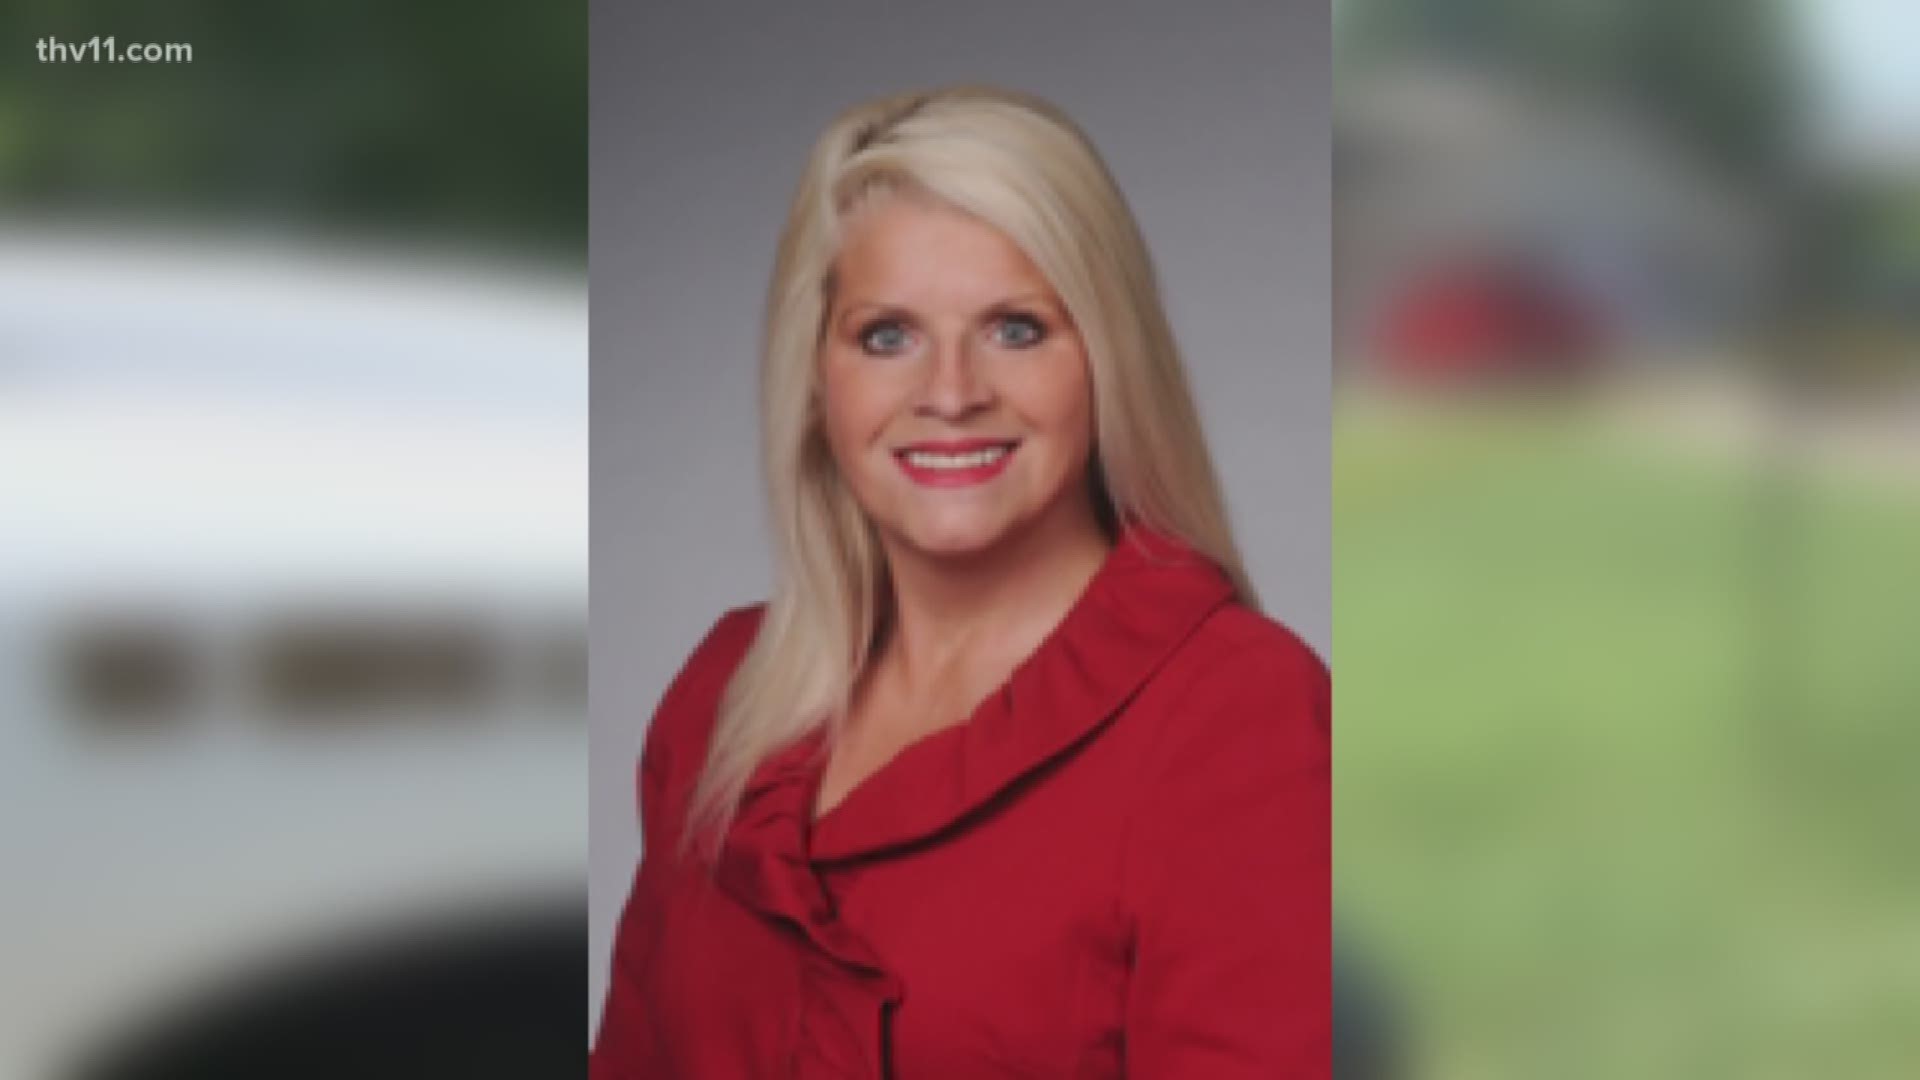 A woman is in police custody tonight in connection with the death of a former state senator.